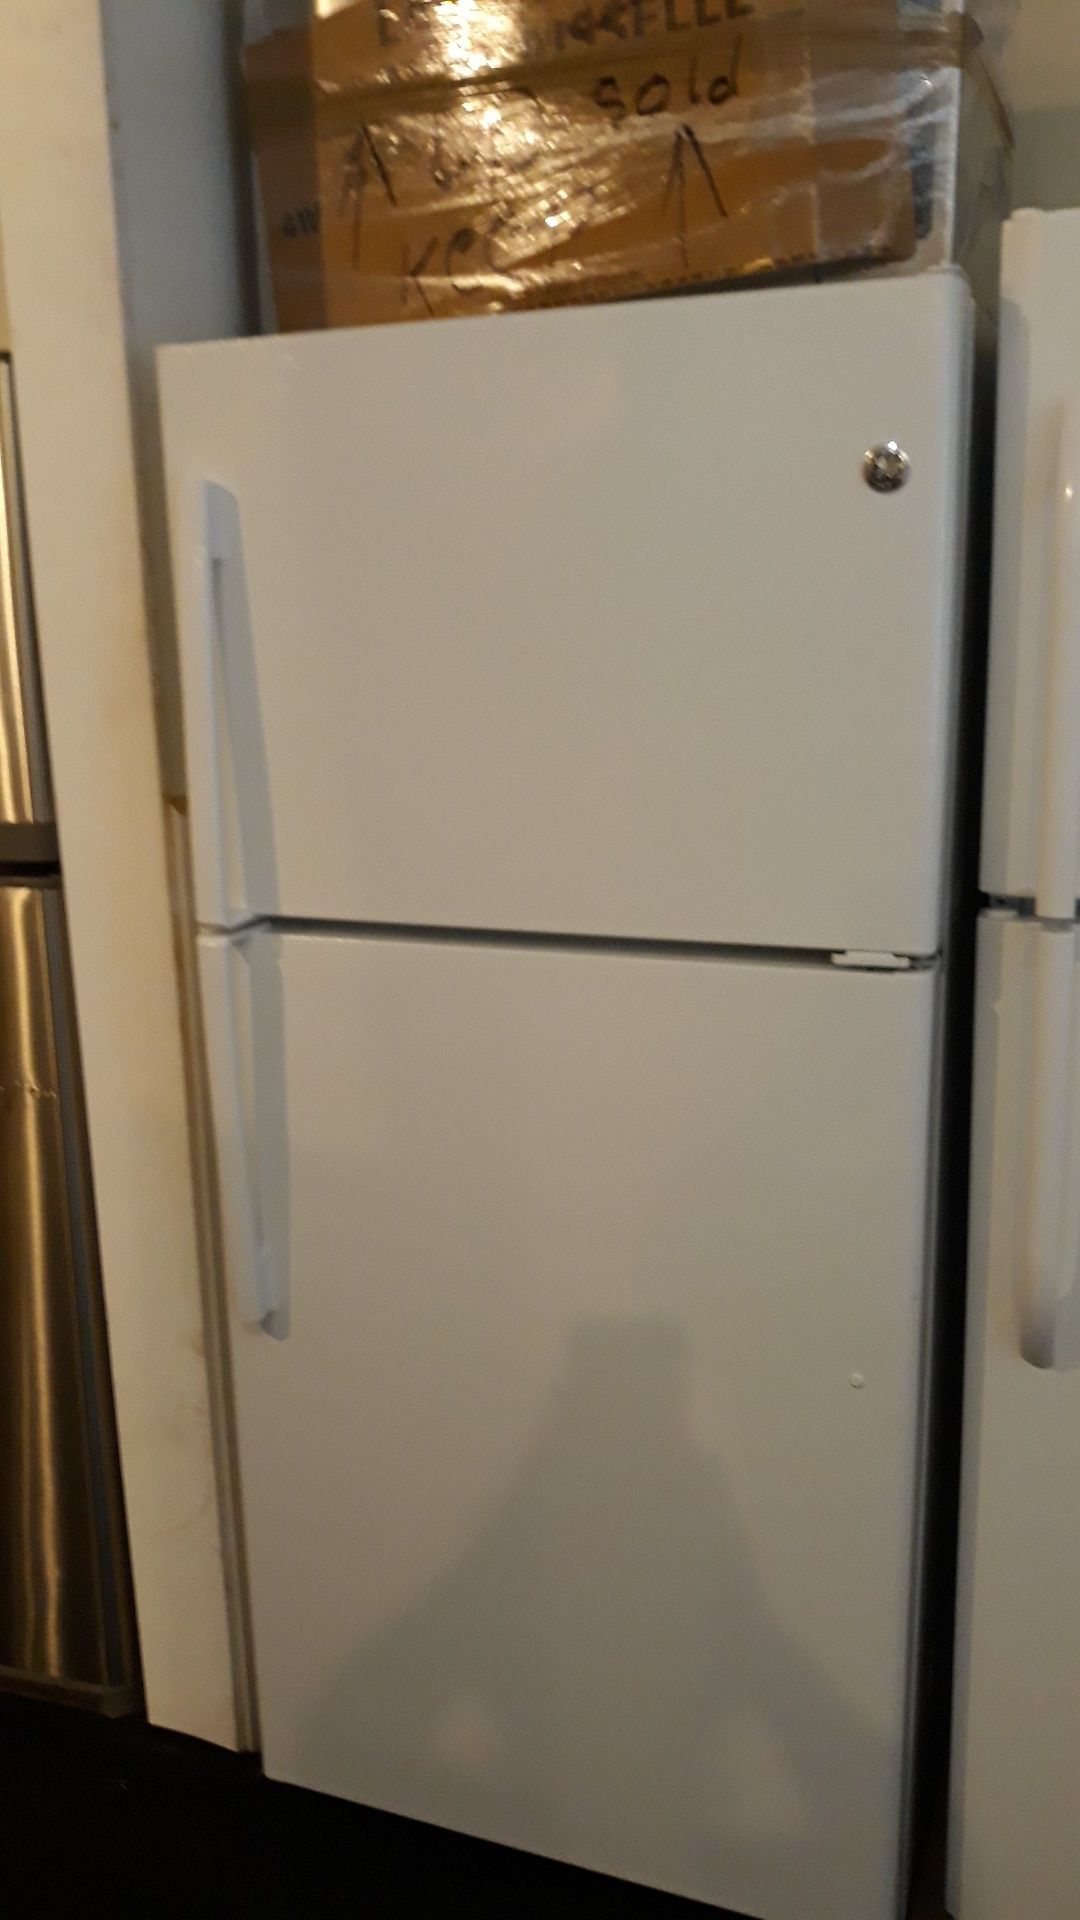 Ge top and bottom refrigerator brand new scratch and dent 6 months warranty